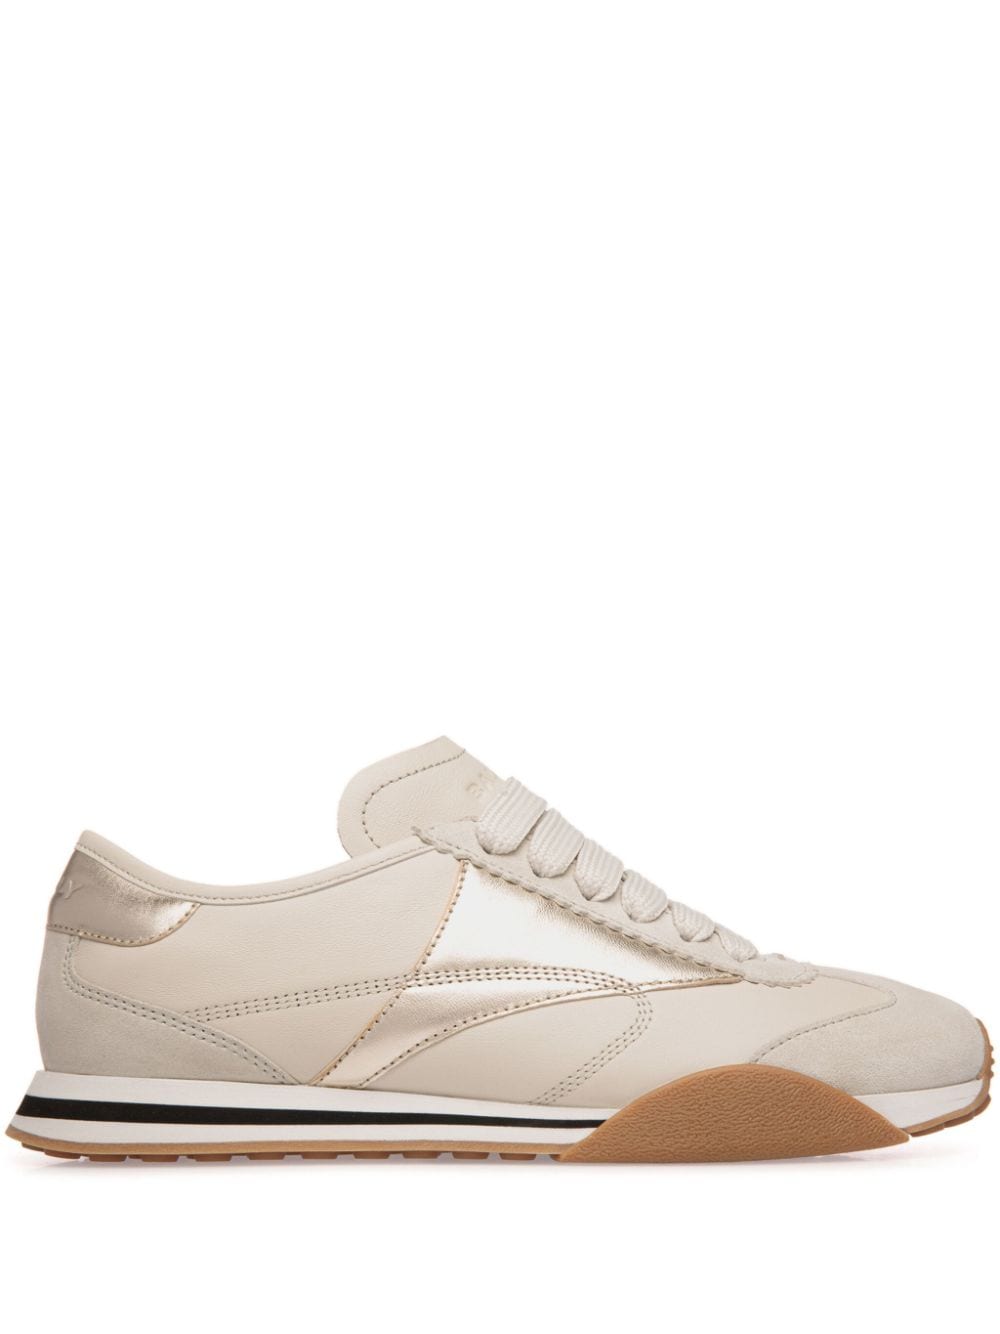 Bally Sussex Leather Sneakers In Gray